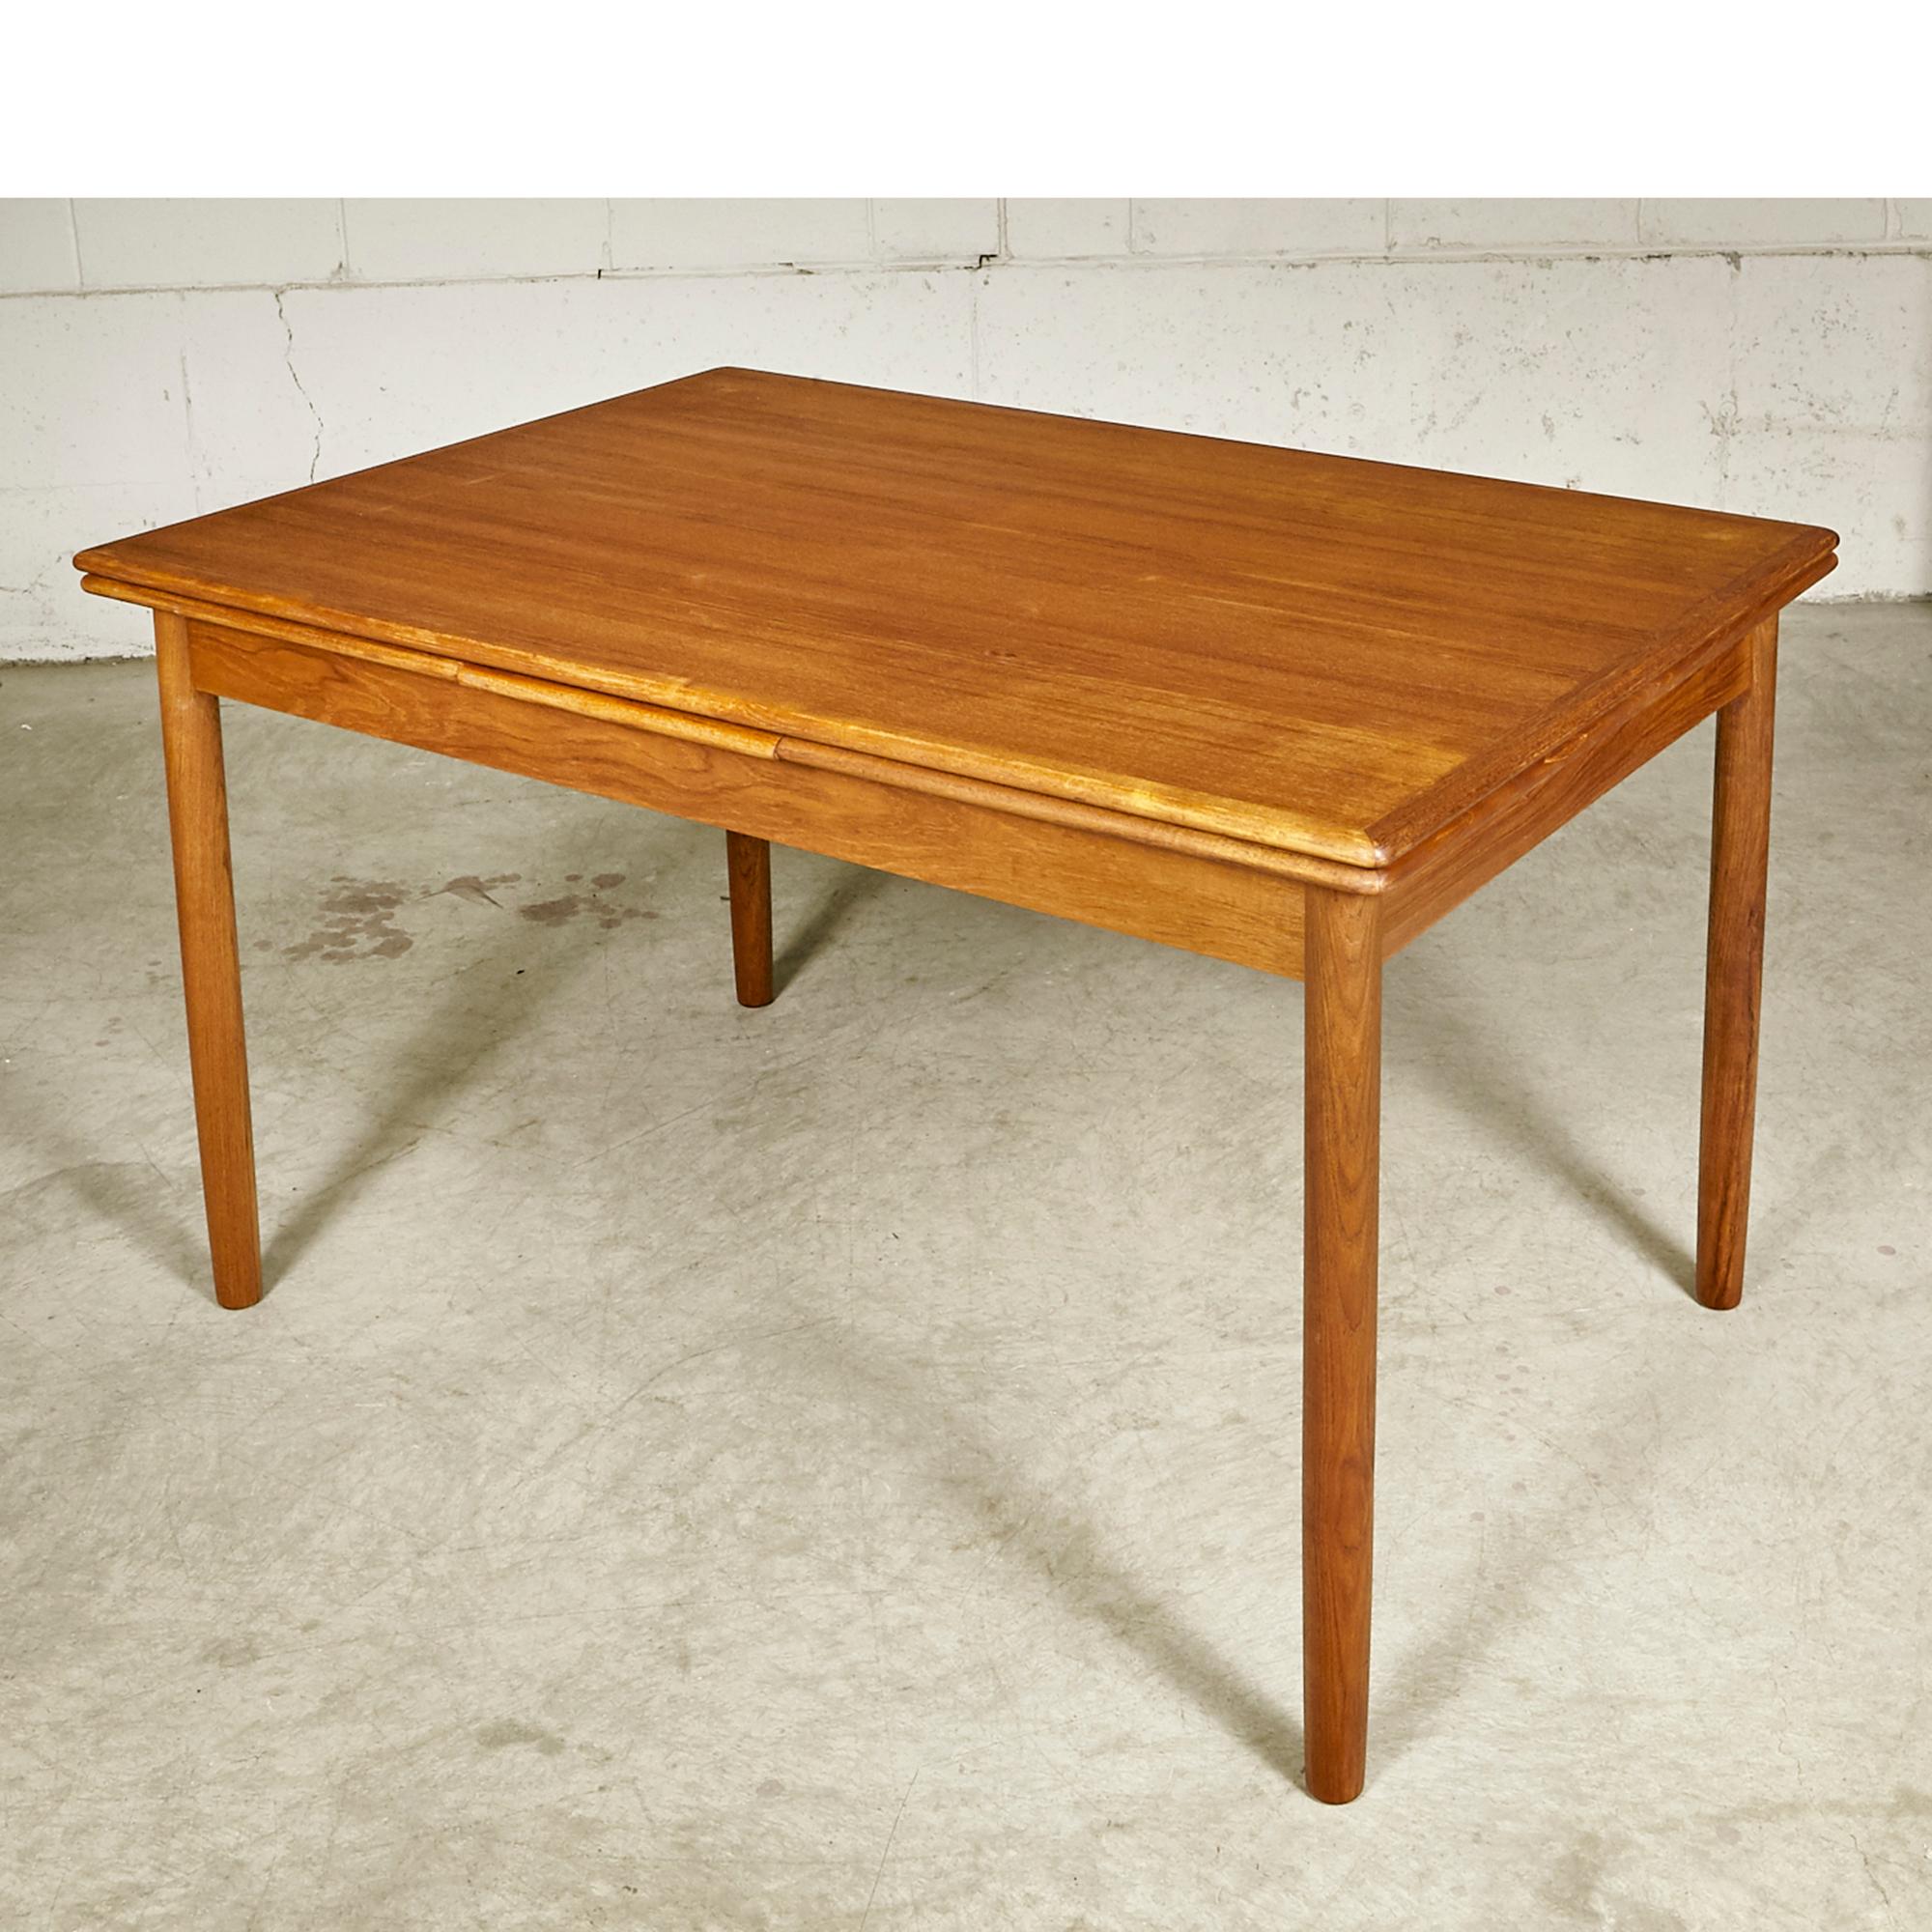 Danish Teak Expandable Dining Room Table In Good Condition For Sale In Amherst, NH